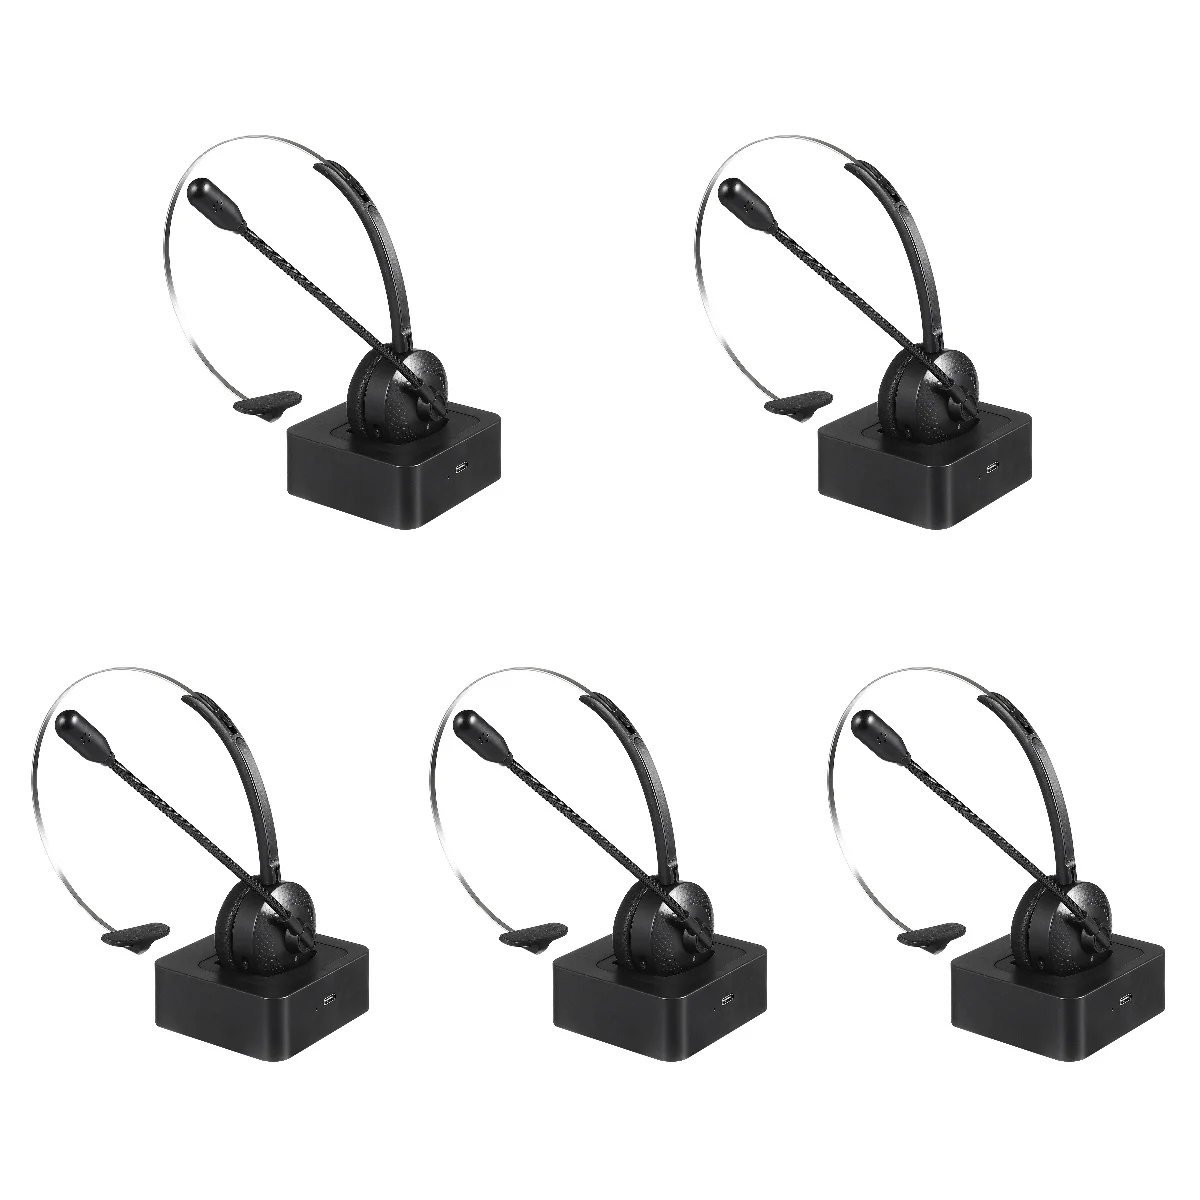 

5pcs .0 Wireless Headset Hands-free Call Earpiece with Noise Cancelling Microphone for Business Truck Driver